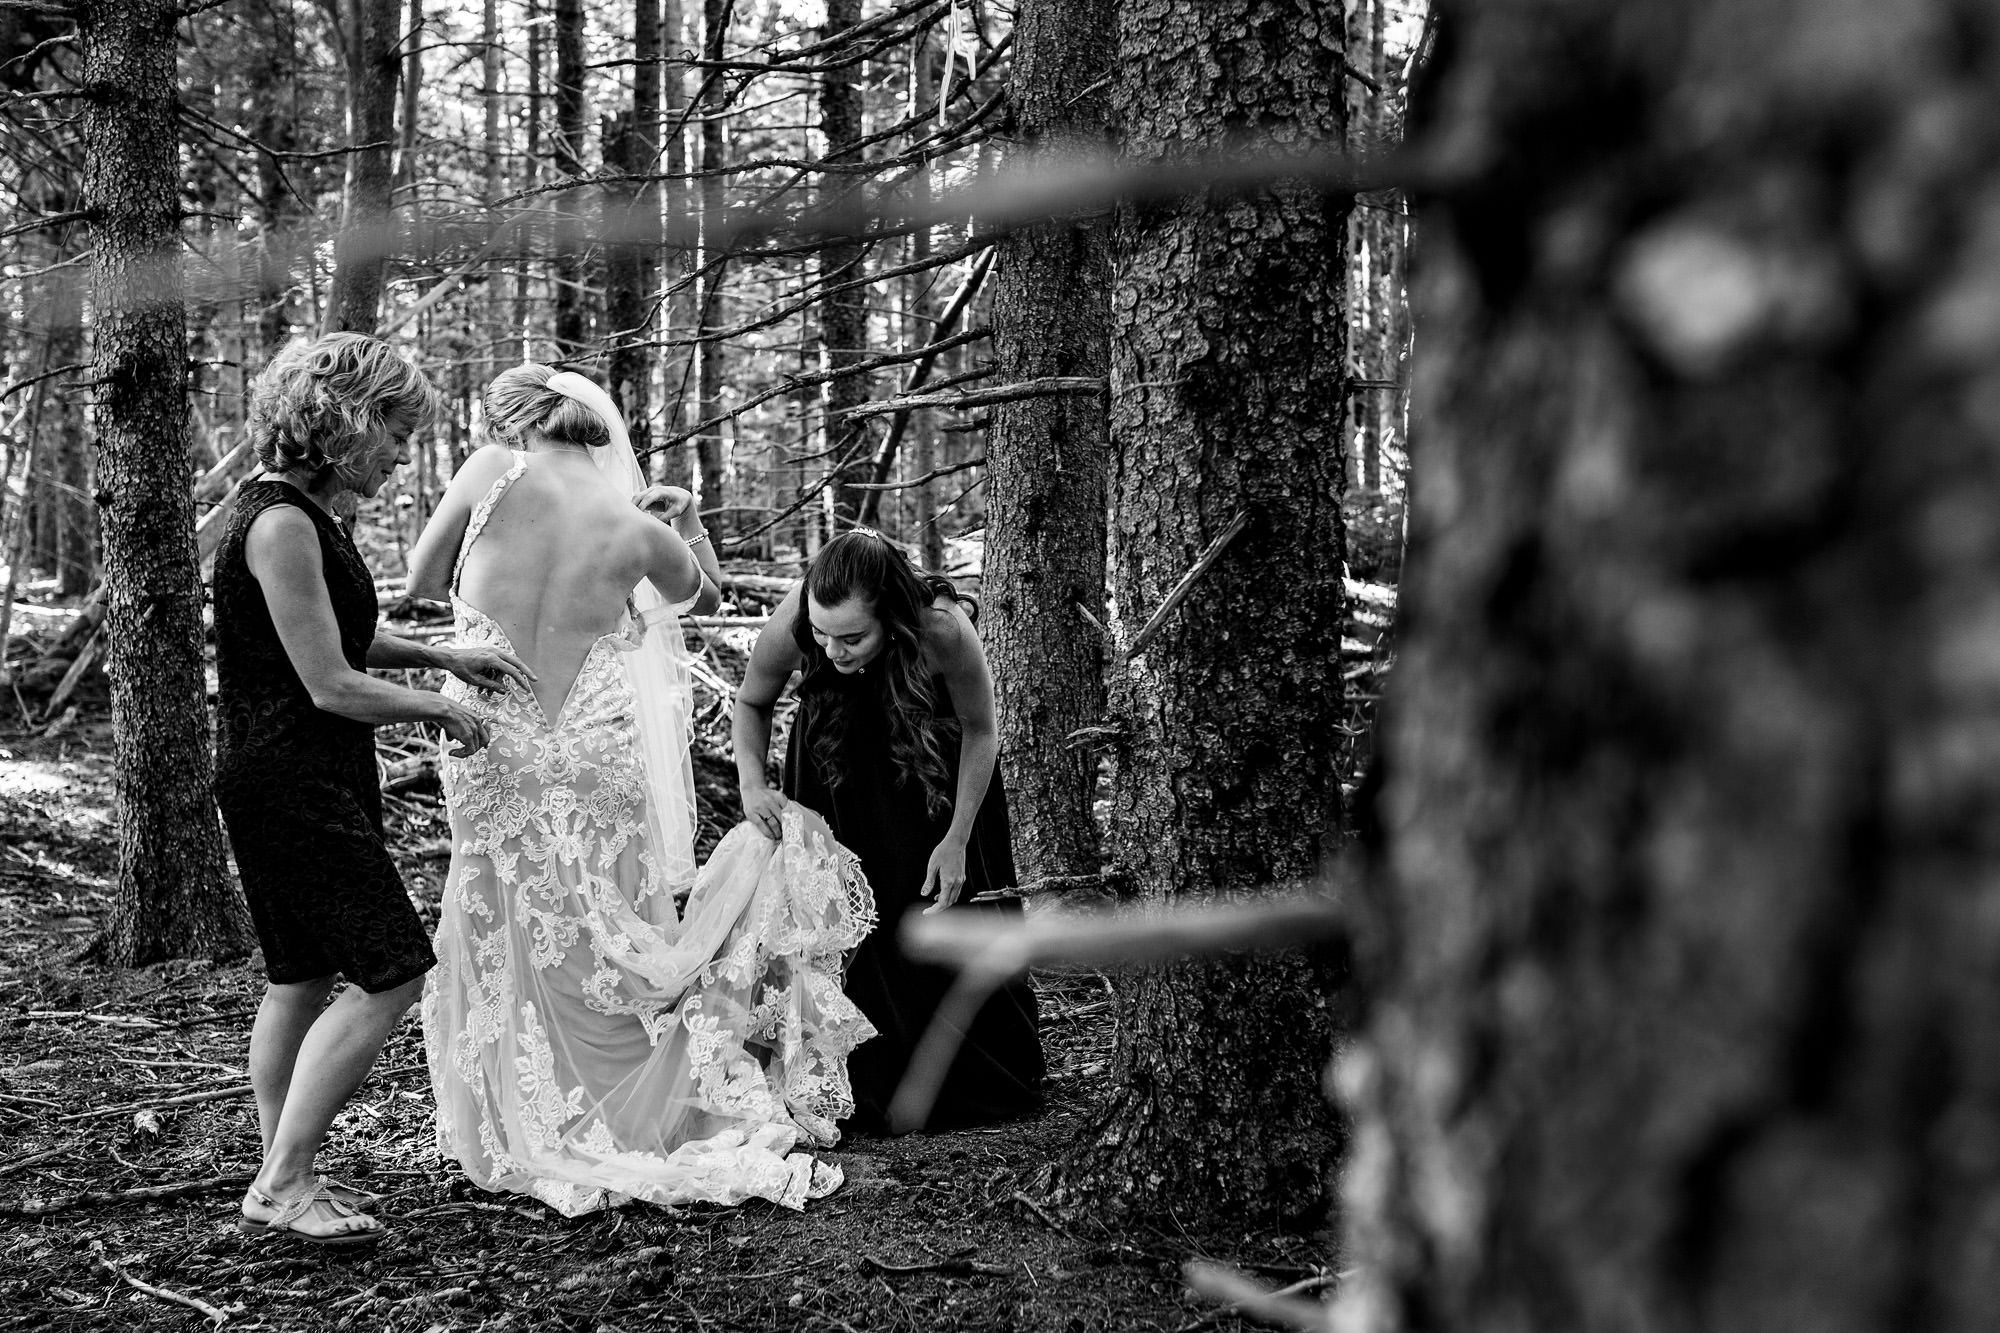 A bride puts on her wedding dress in the woods.